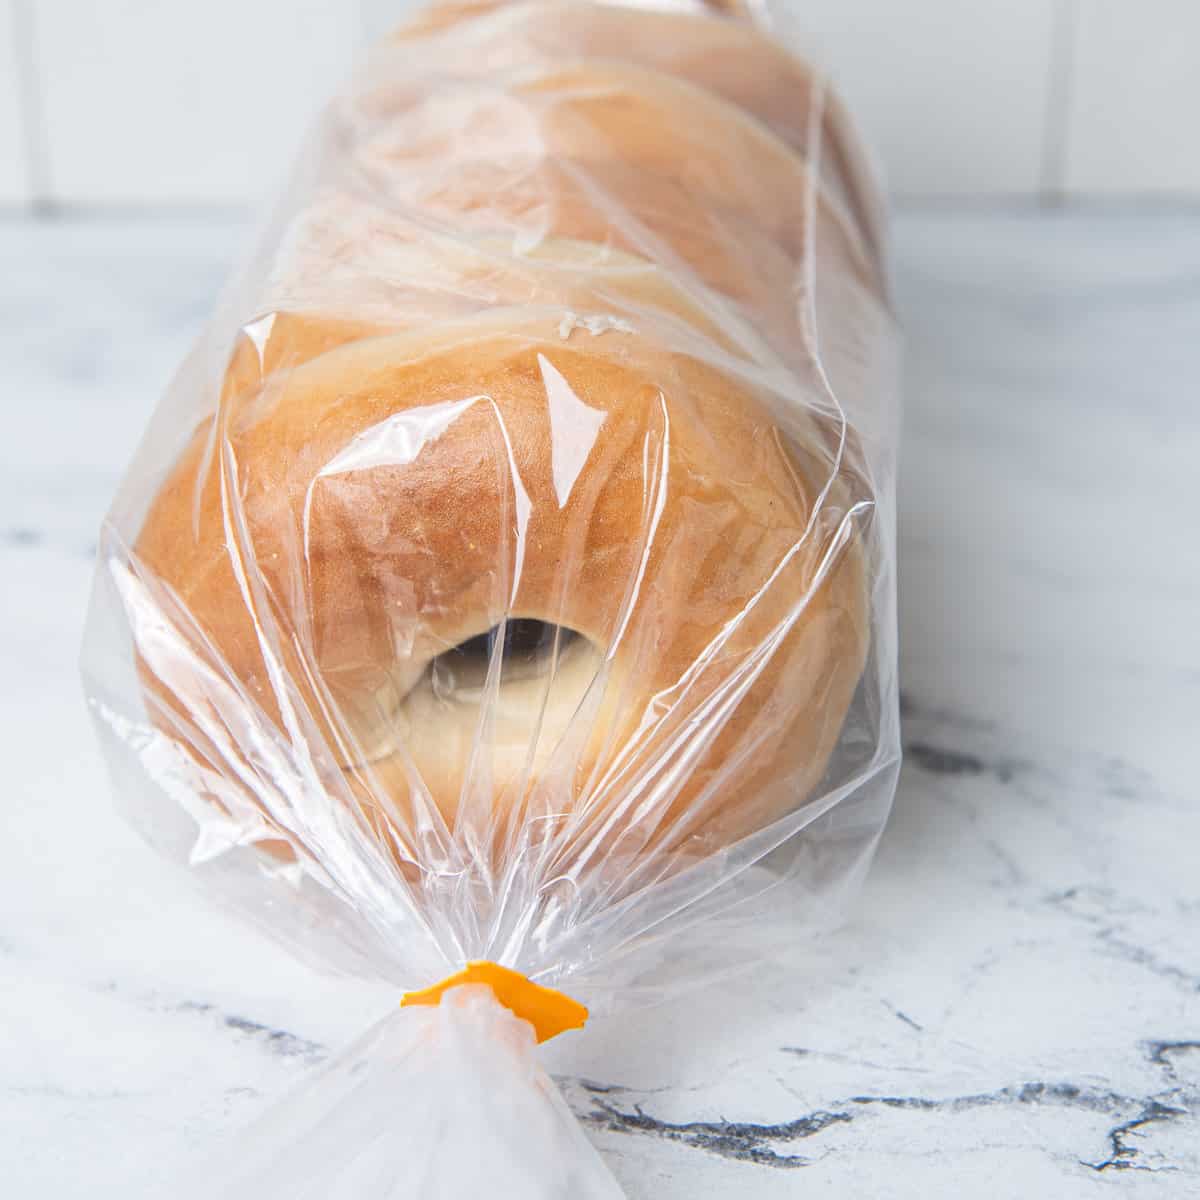 Bagels in a plastic bag on a kitchen counter.